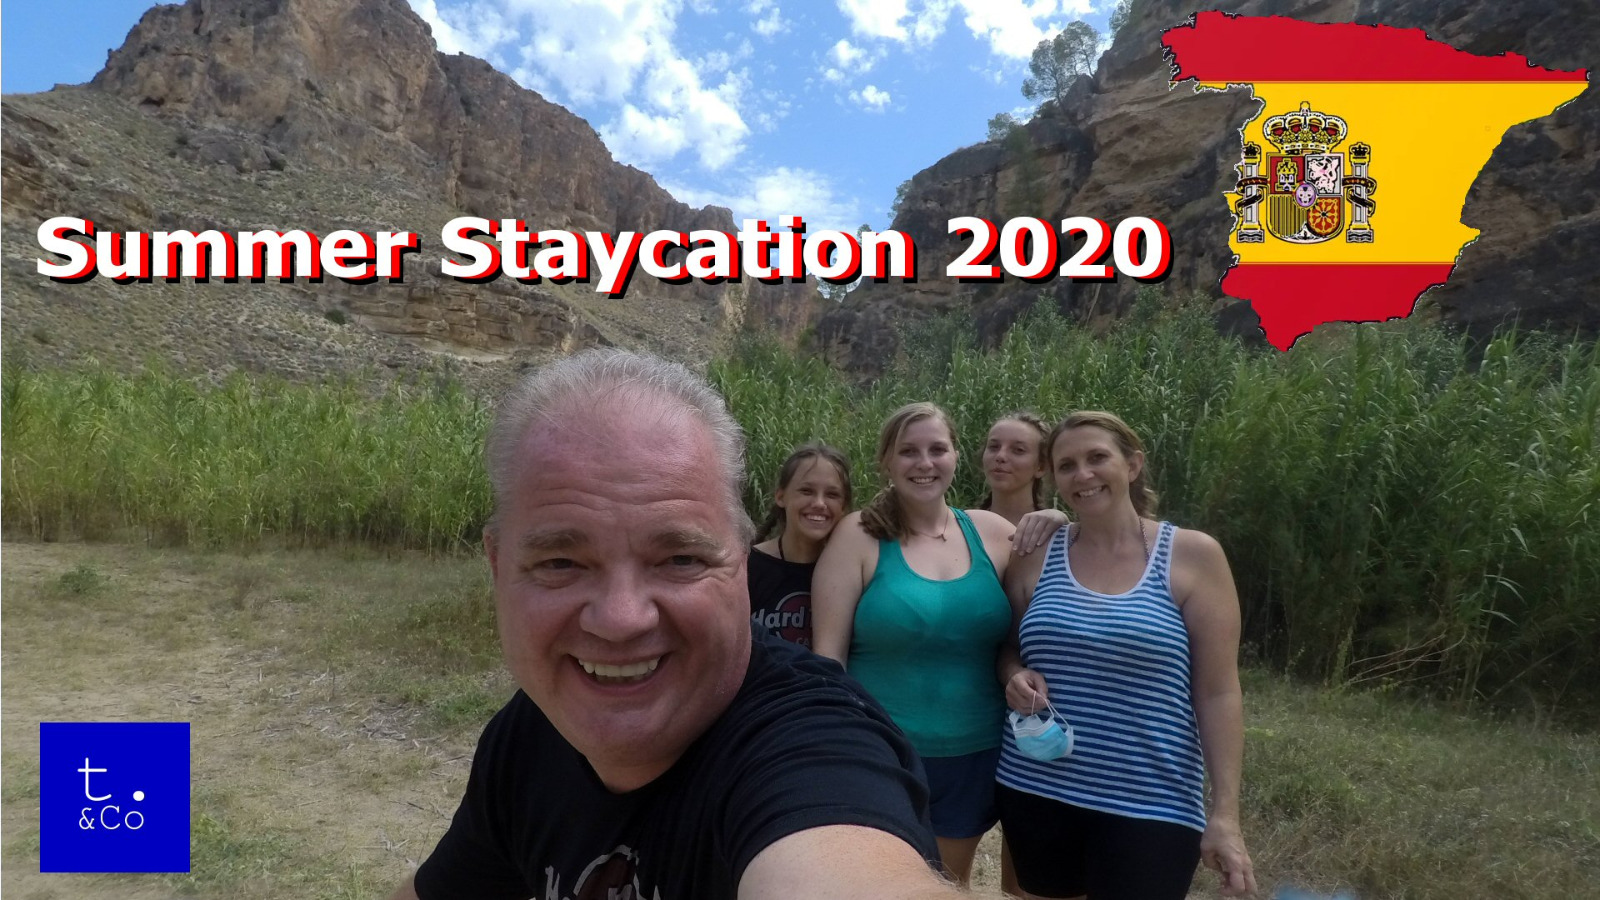 Our Spanish Staycation 2020